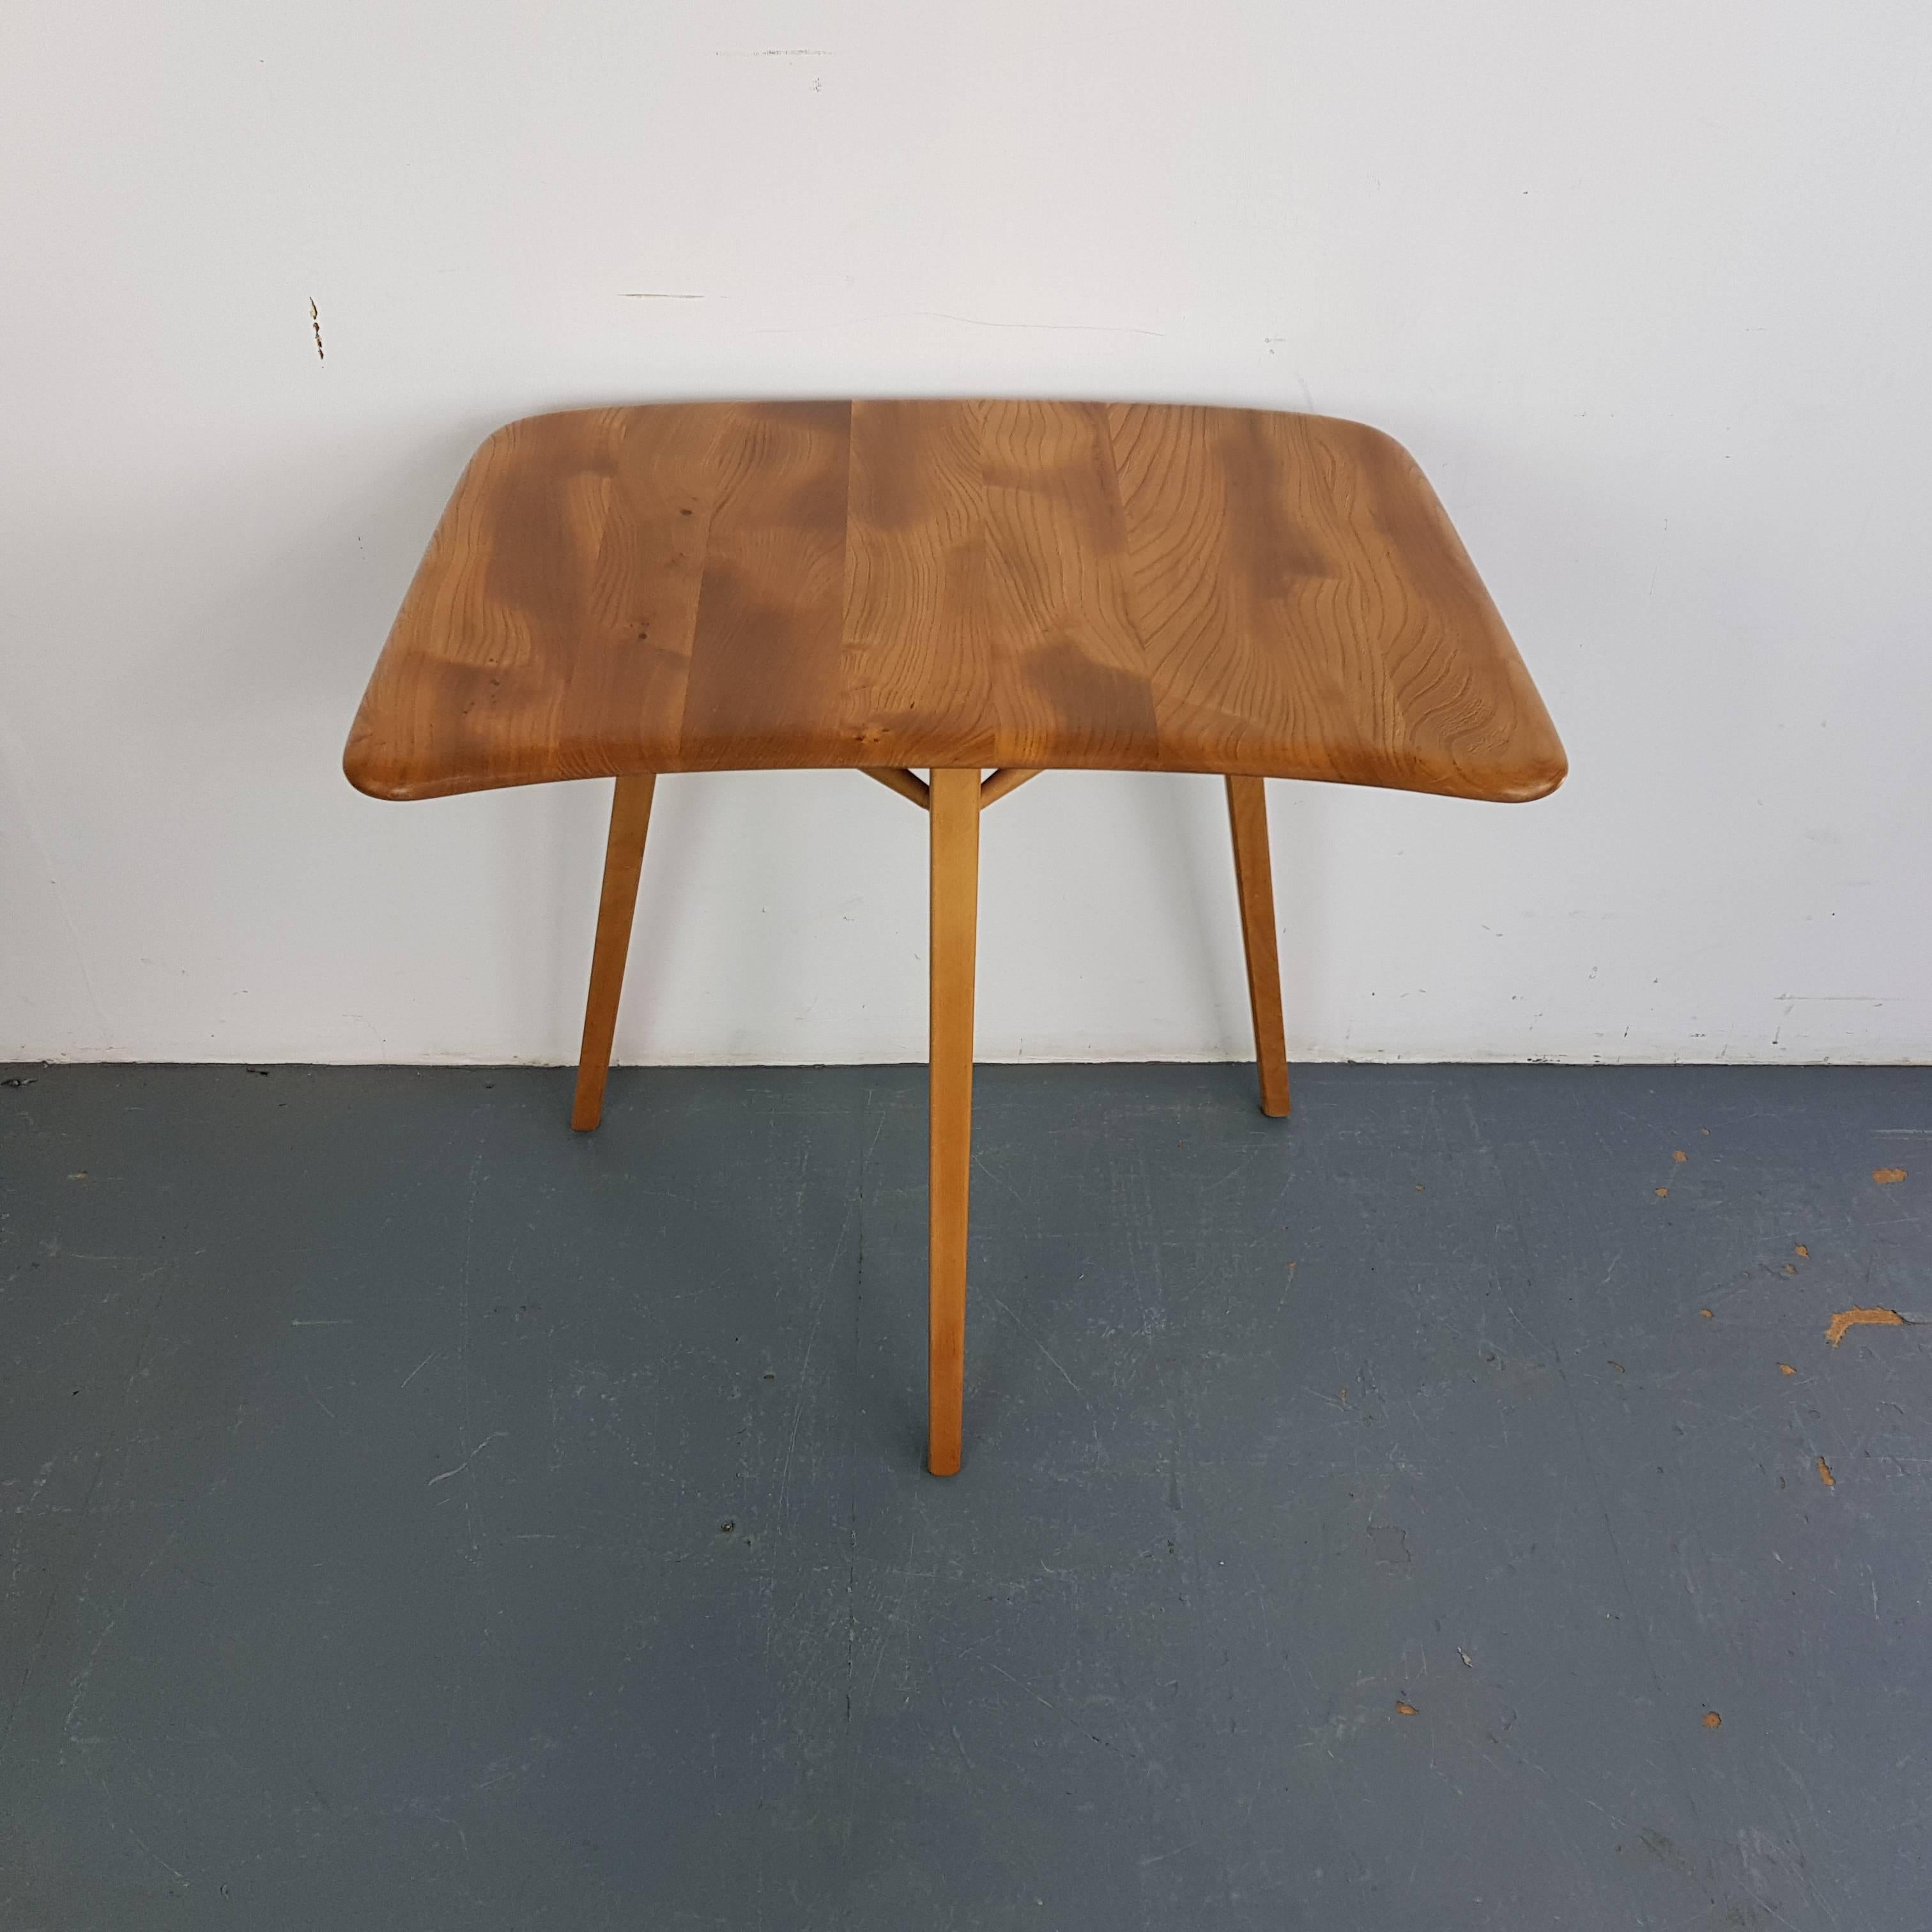 Very rare vintage (mid 60s) Ercol plank table desk extension. Elm and beech. Could be used as a stand alone desk or (as pictured) to extend an Ercol plank table.

In very good vintage condition. It's a vintage item, so has some general age-related